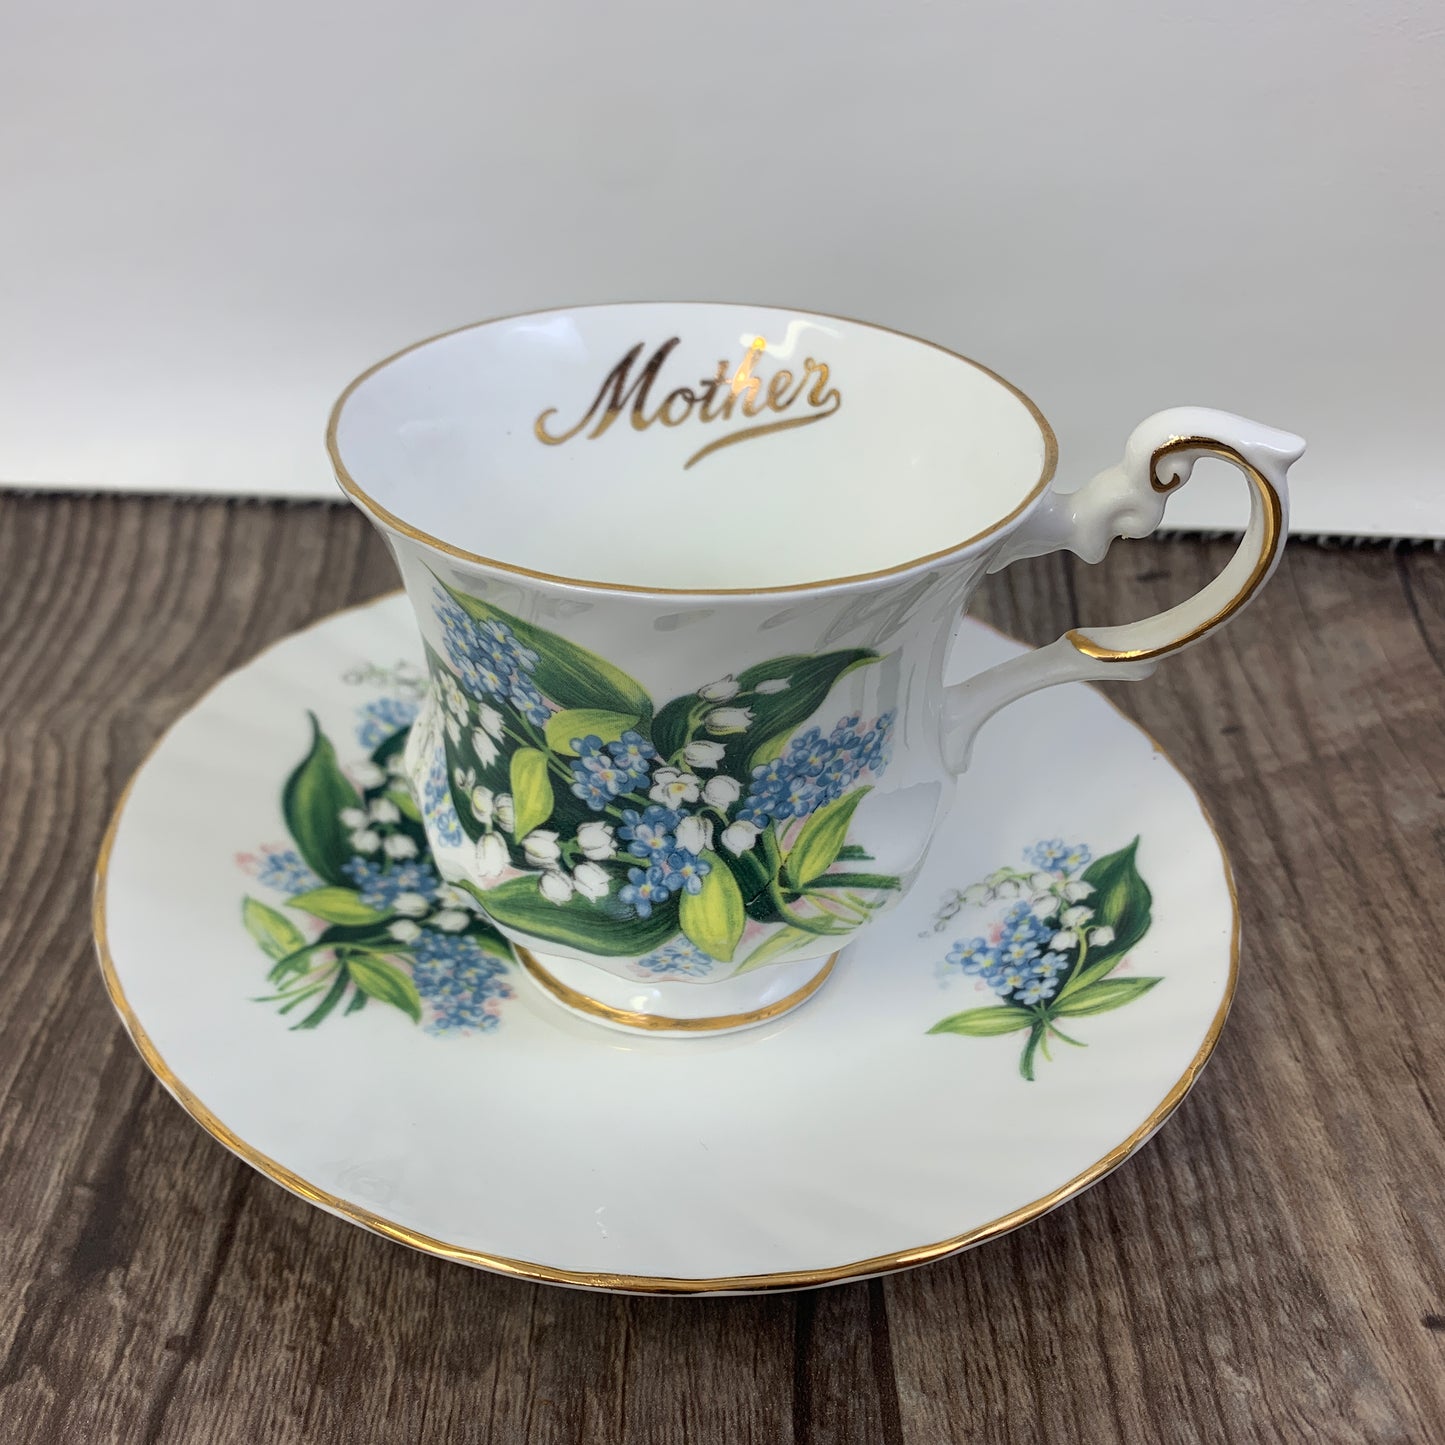 Lily of the Valley Teacup, Gift for Mother, Blue and White Floral Pattern Tea Cup